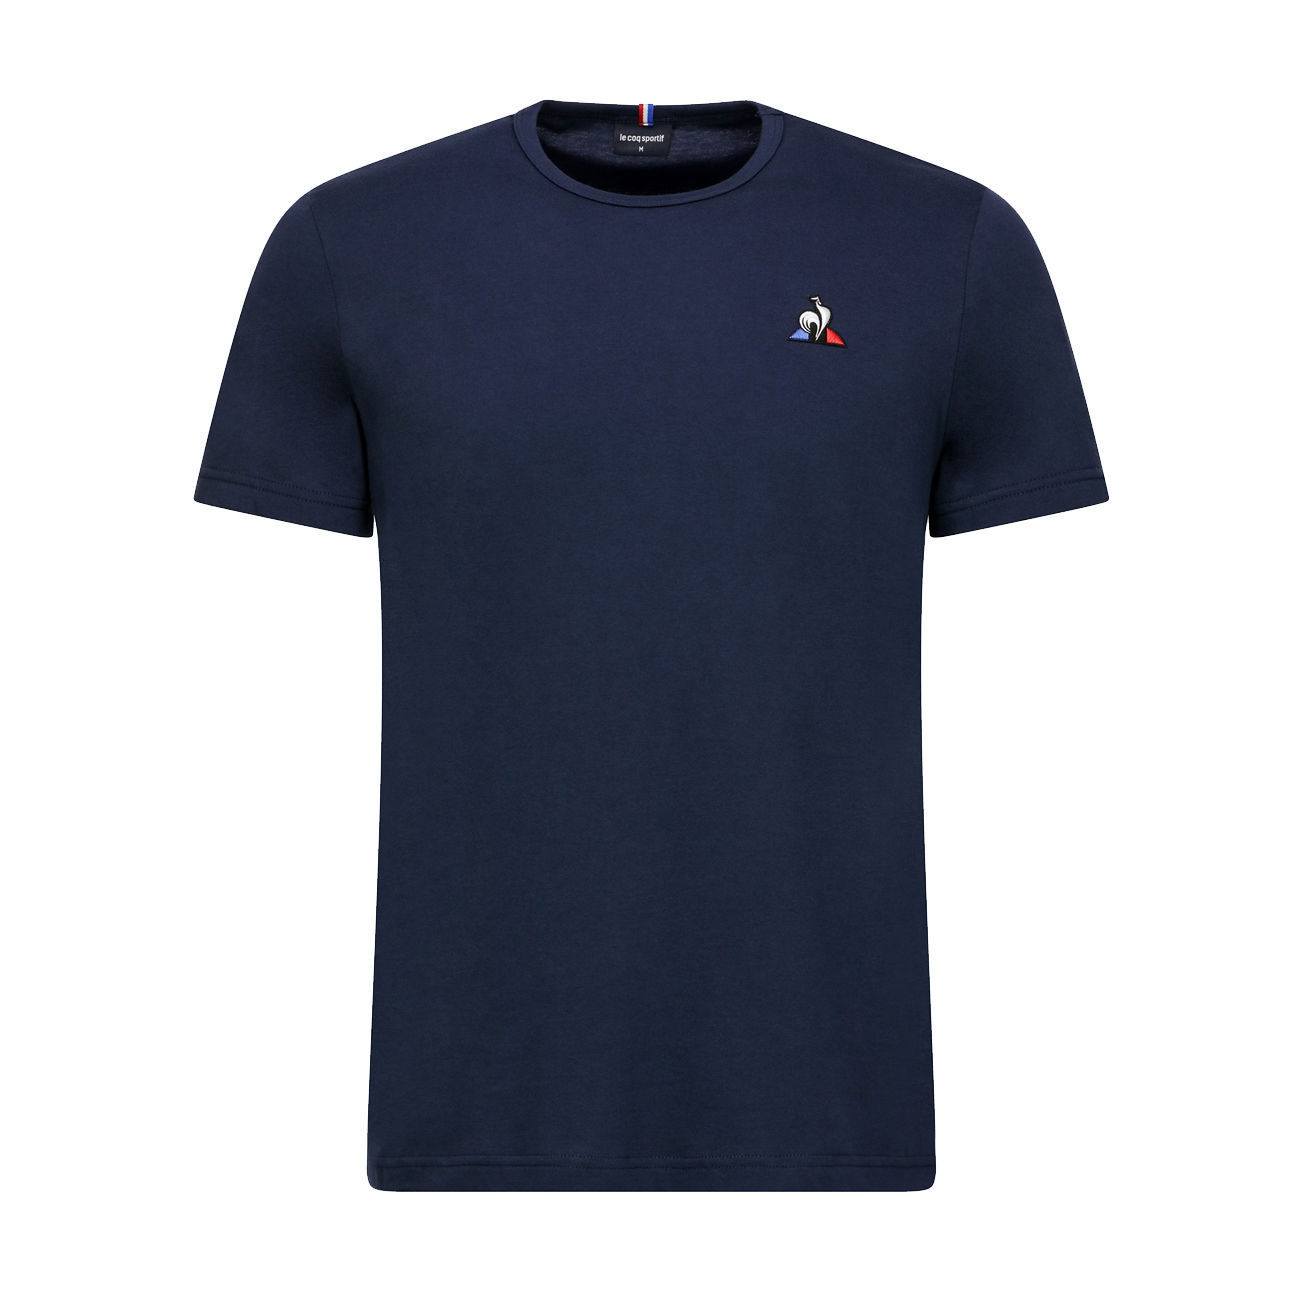 Andre steder bede audition LE COQ SPORTIF ESSENTIELS T-SHIRT WITH EMBROIDERED LOGO Man Dress Blues |  Mascheroni Store